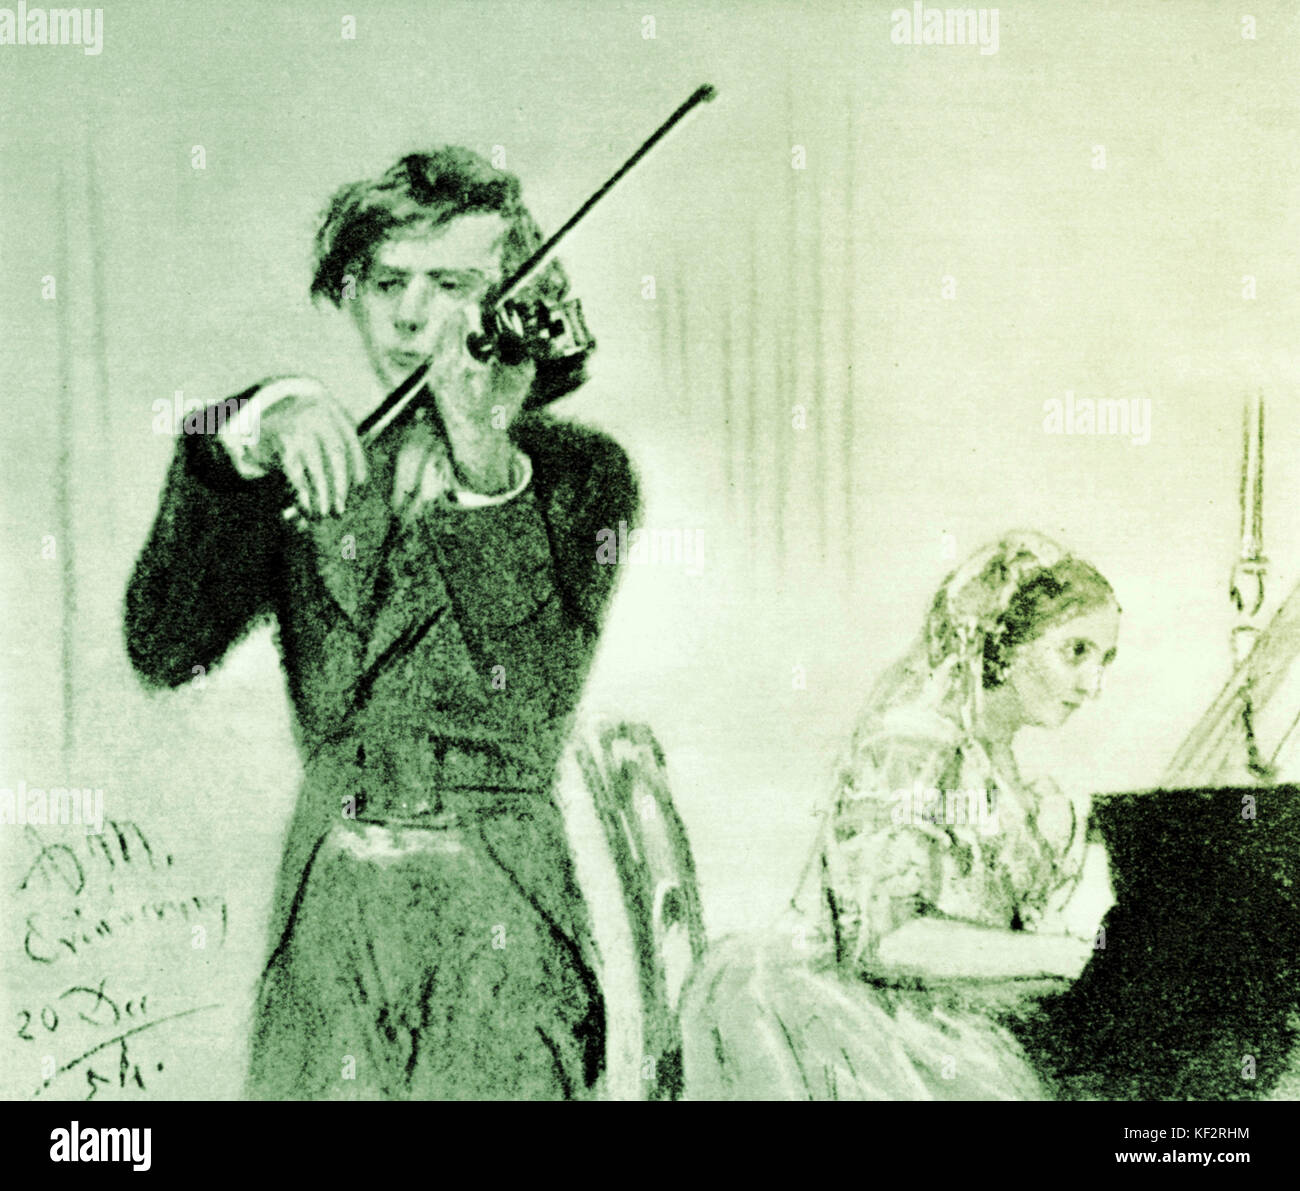 JOACHIM  Joseph playing violin and accompanying Clara Schumann on the piano.  Painting by Adolph Menzel, 1854.  Hungarian (Germanized) violinist. Violinist, composer, conductor       (1831-1907) Stock Photo